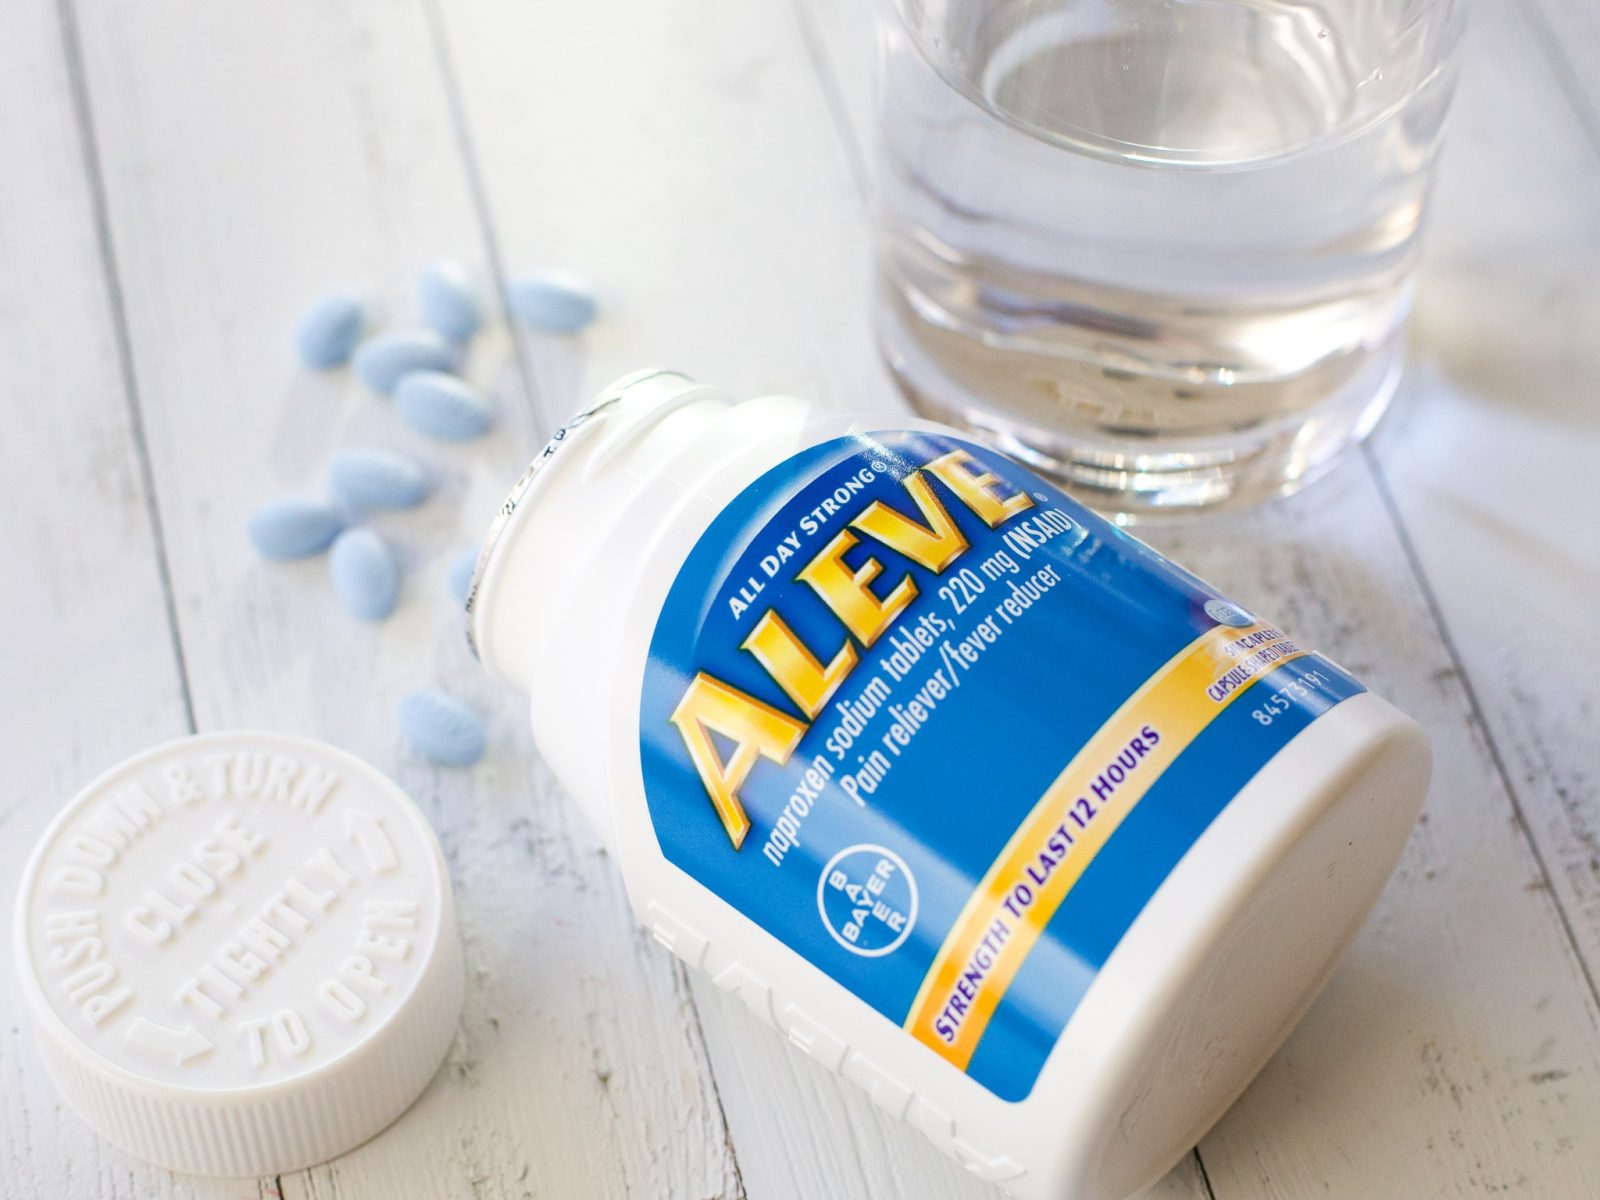 Aleve 90-Count As Low As $6.99 At Kroger – Save $4 Per Bottle